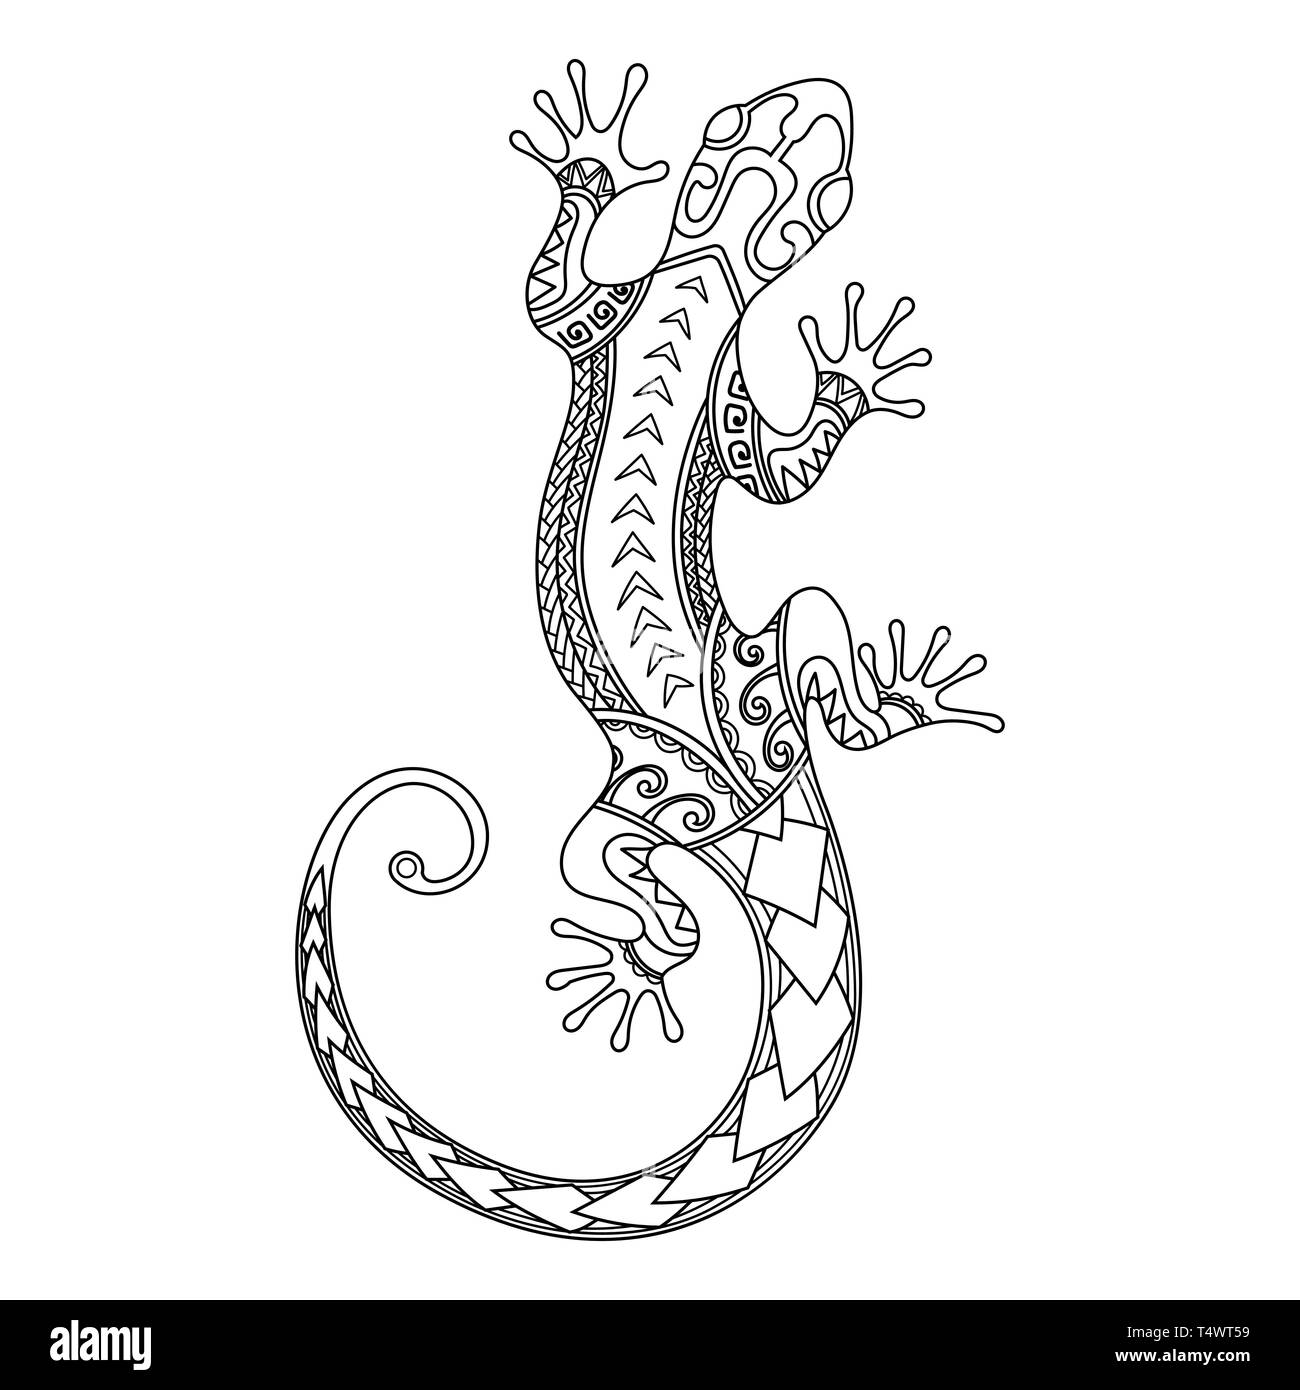 10 Rocking Gecko Tattoo Designs With Images  Styles At Life